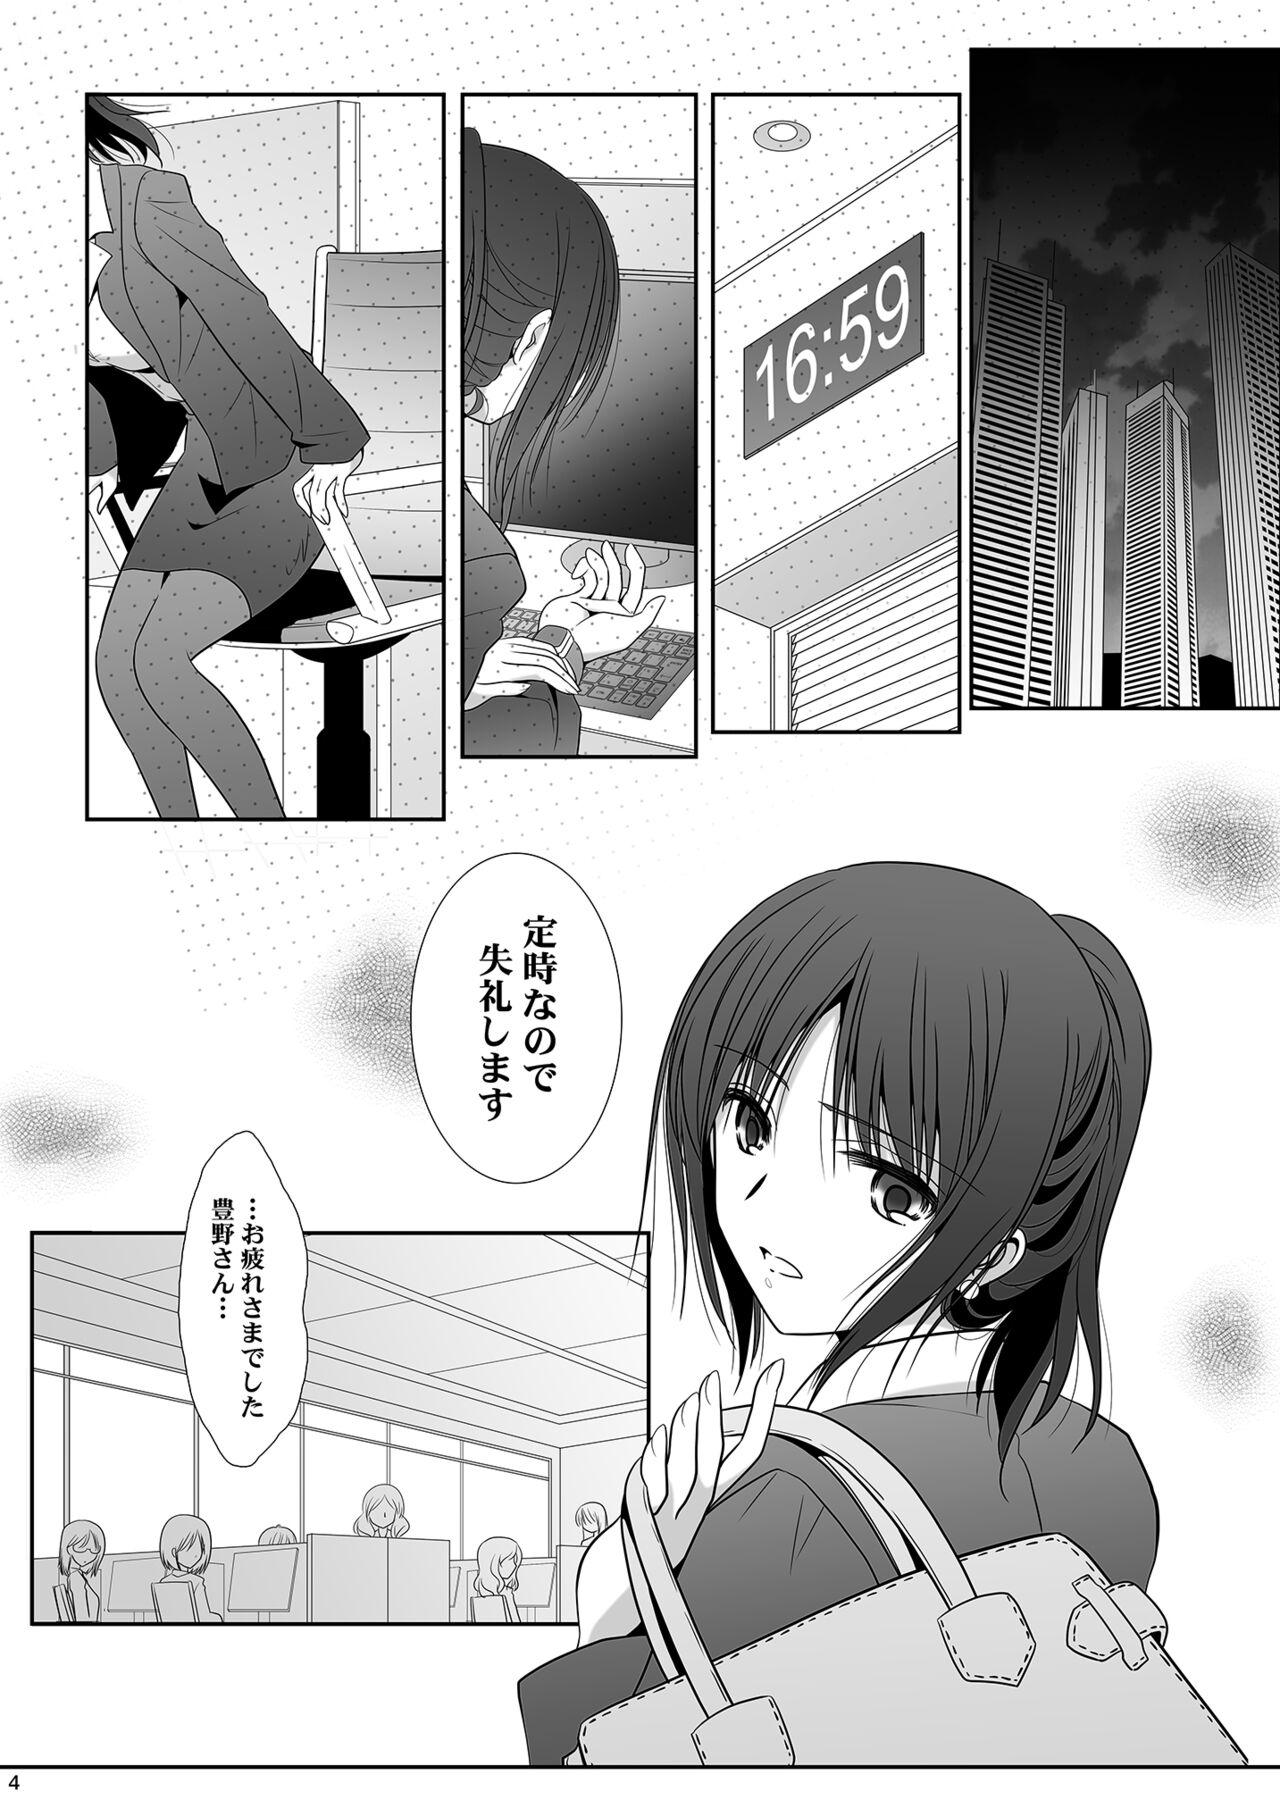 Mask Toshi no Thirteen - Age Difference is 13 Years - Original Real Amateurs - Page 4